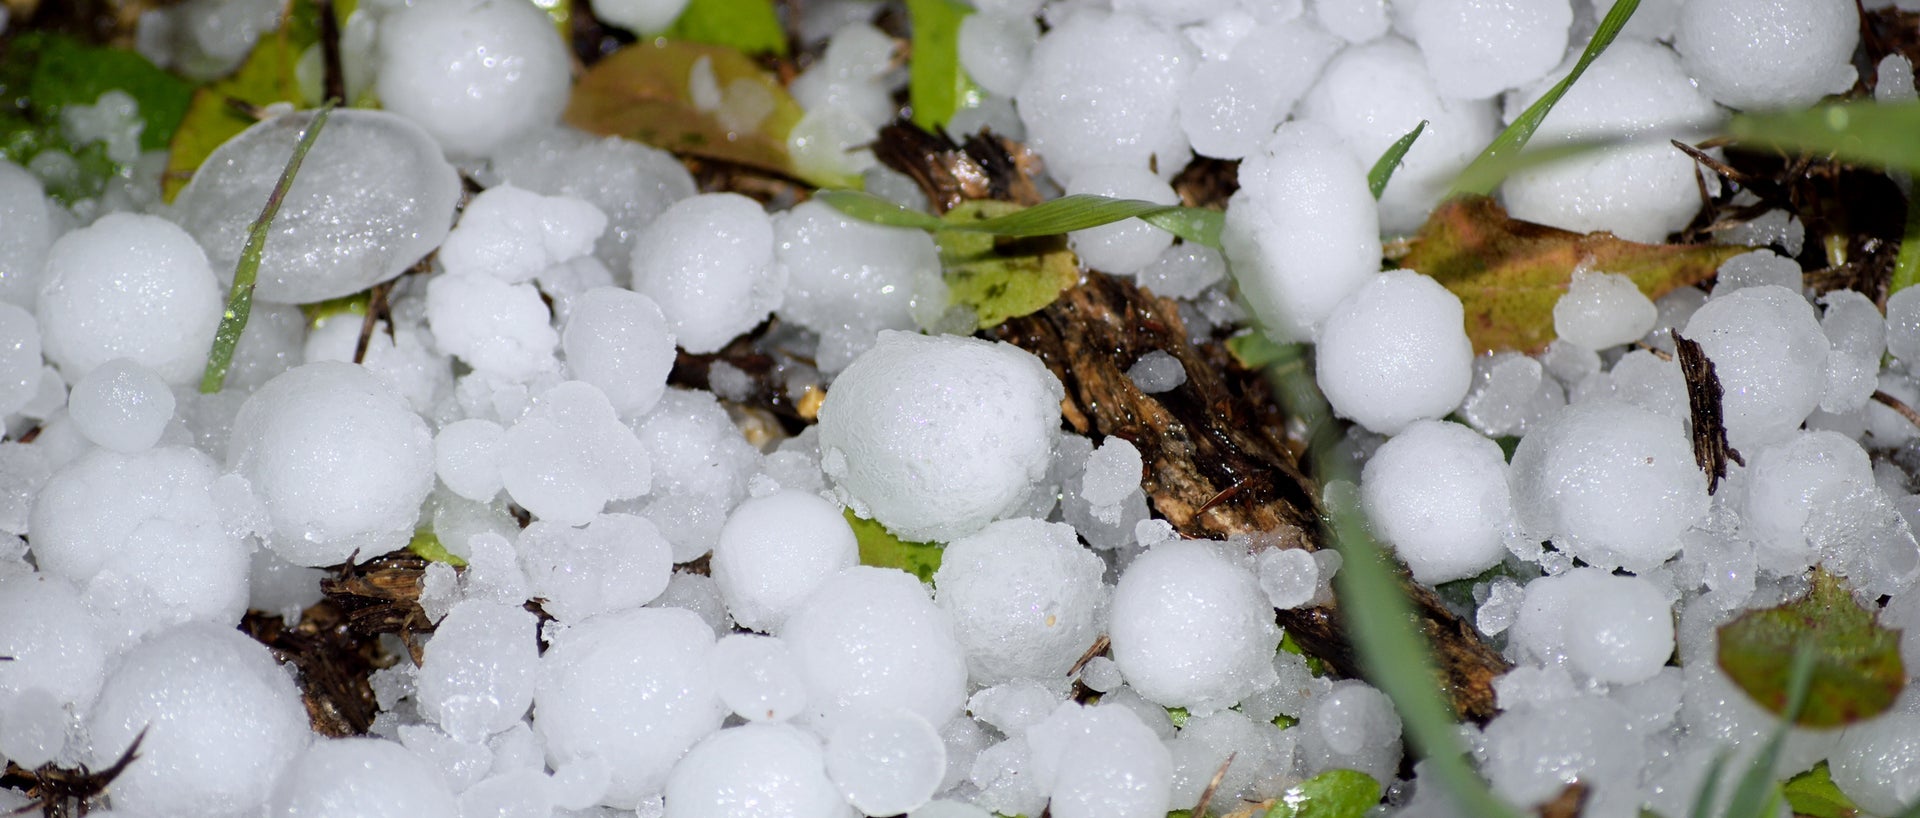 Zoomed in photo of small hail stones on the grass